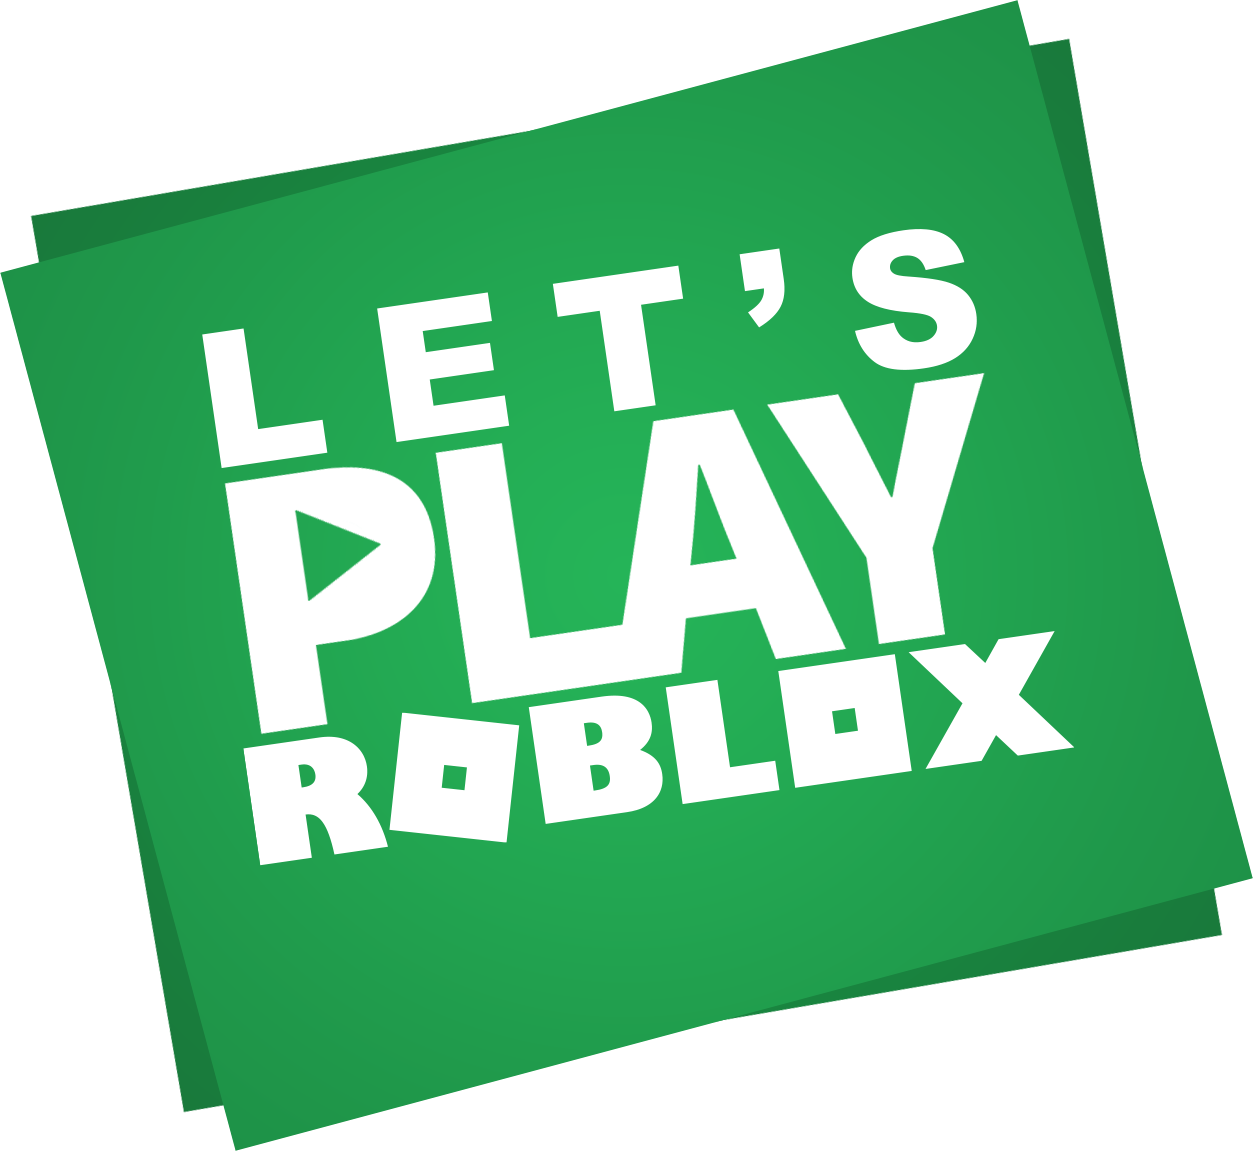 What Is Roblox S Rblx Stock Forecast In 2025 - roblox ipo price prediction